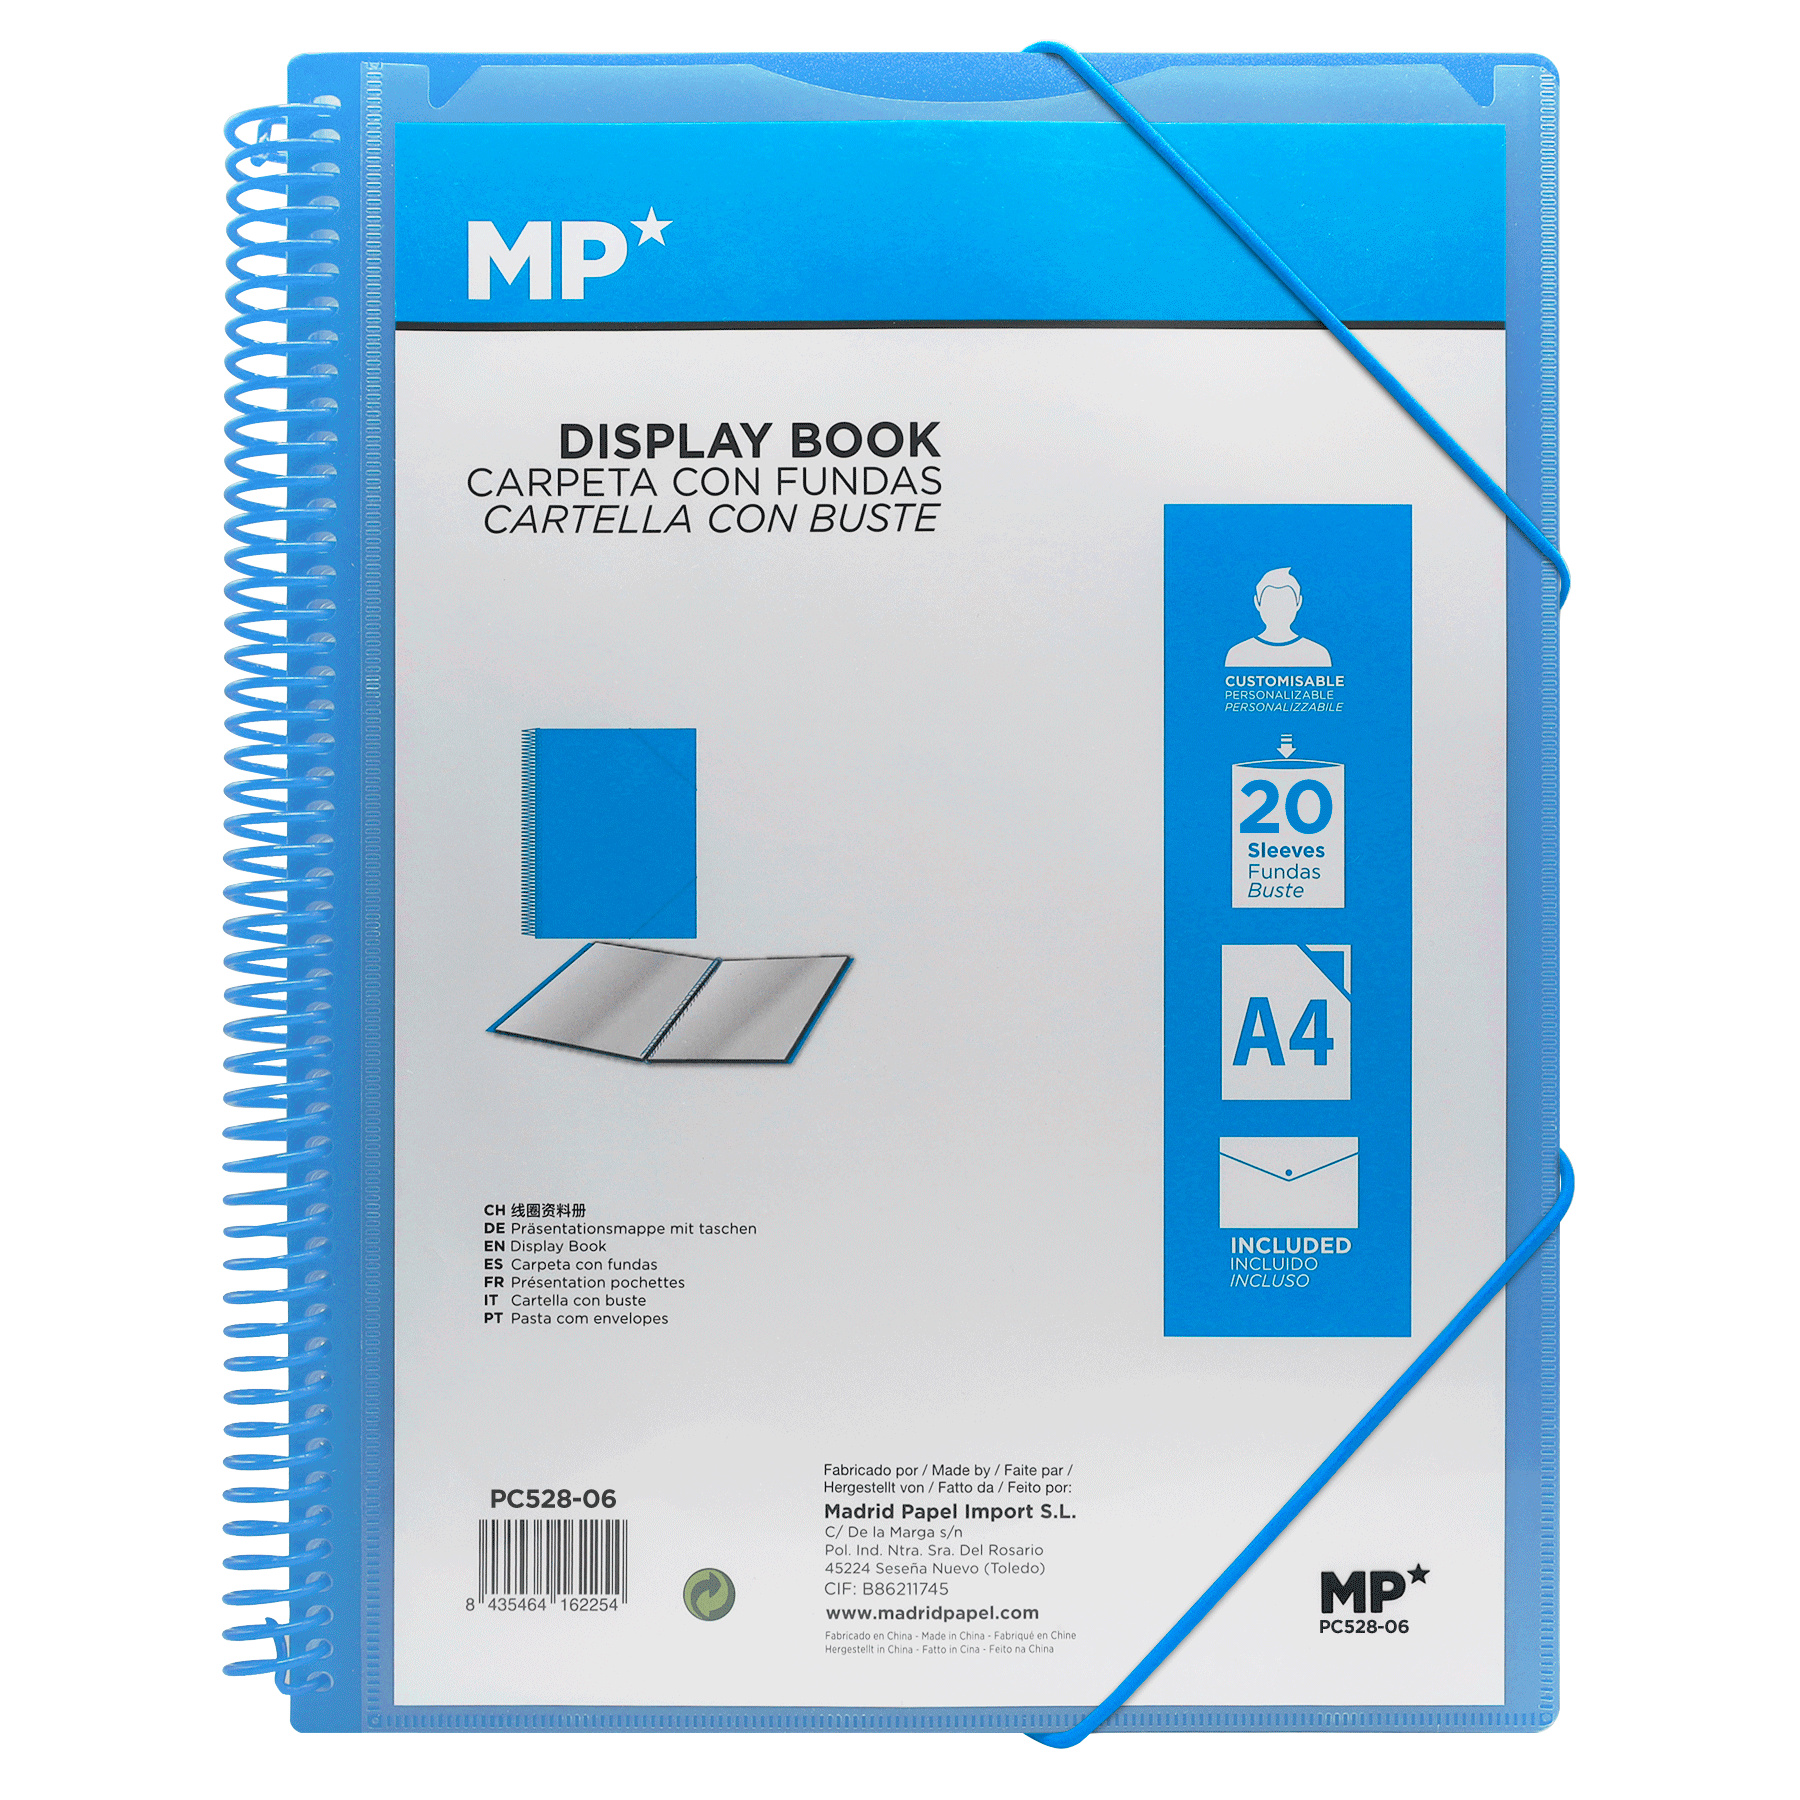 PC528-06 MP Polypropylene Display Book Folder with Spiral and Elastic Bands, 20 sleeves, Blue